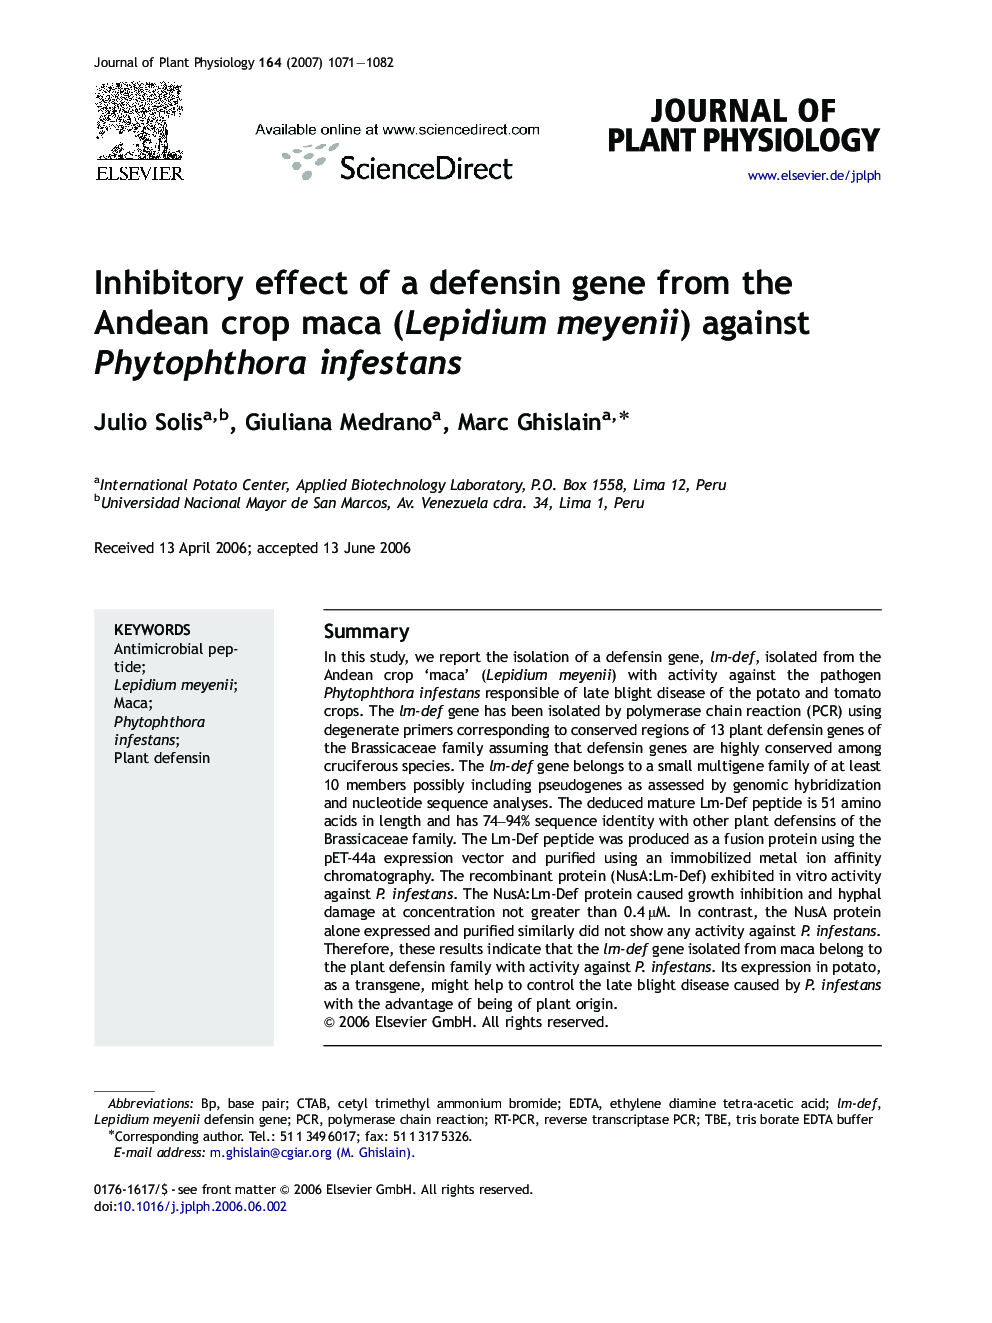 Inhibitory effect of a defensin gene from the Andean crop maca (Lepidium meyenii) against Phytophthora infestans